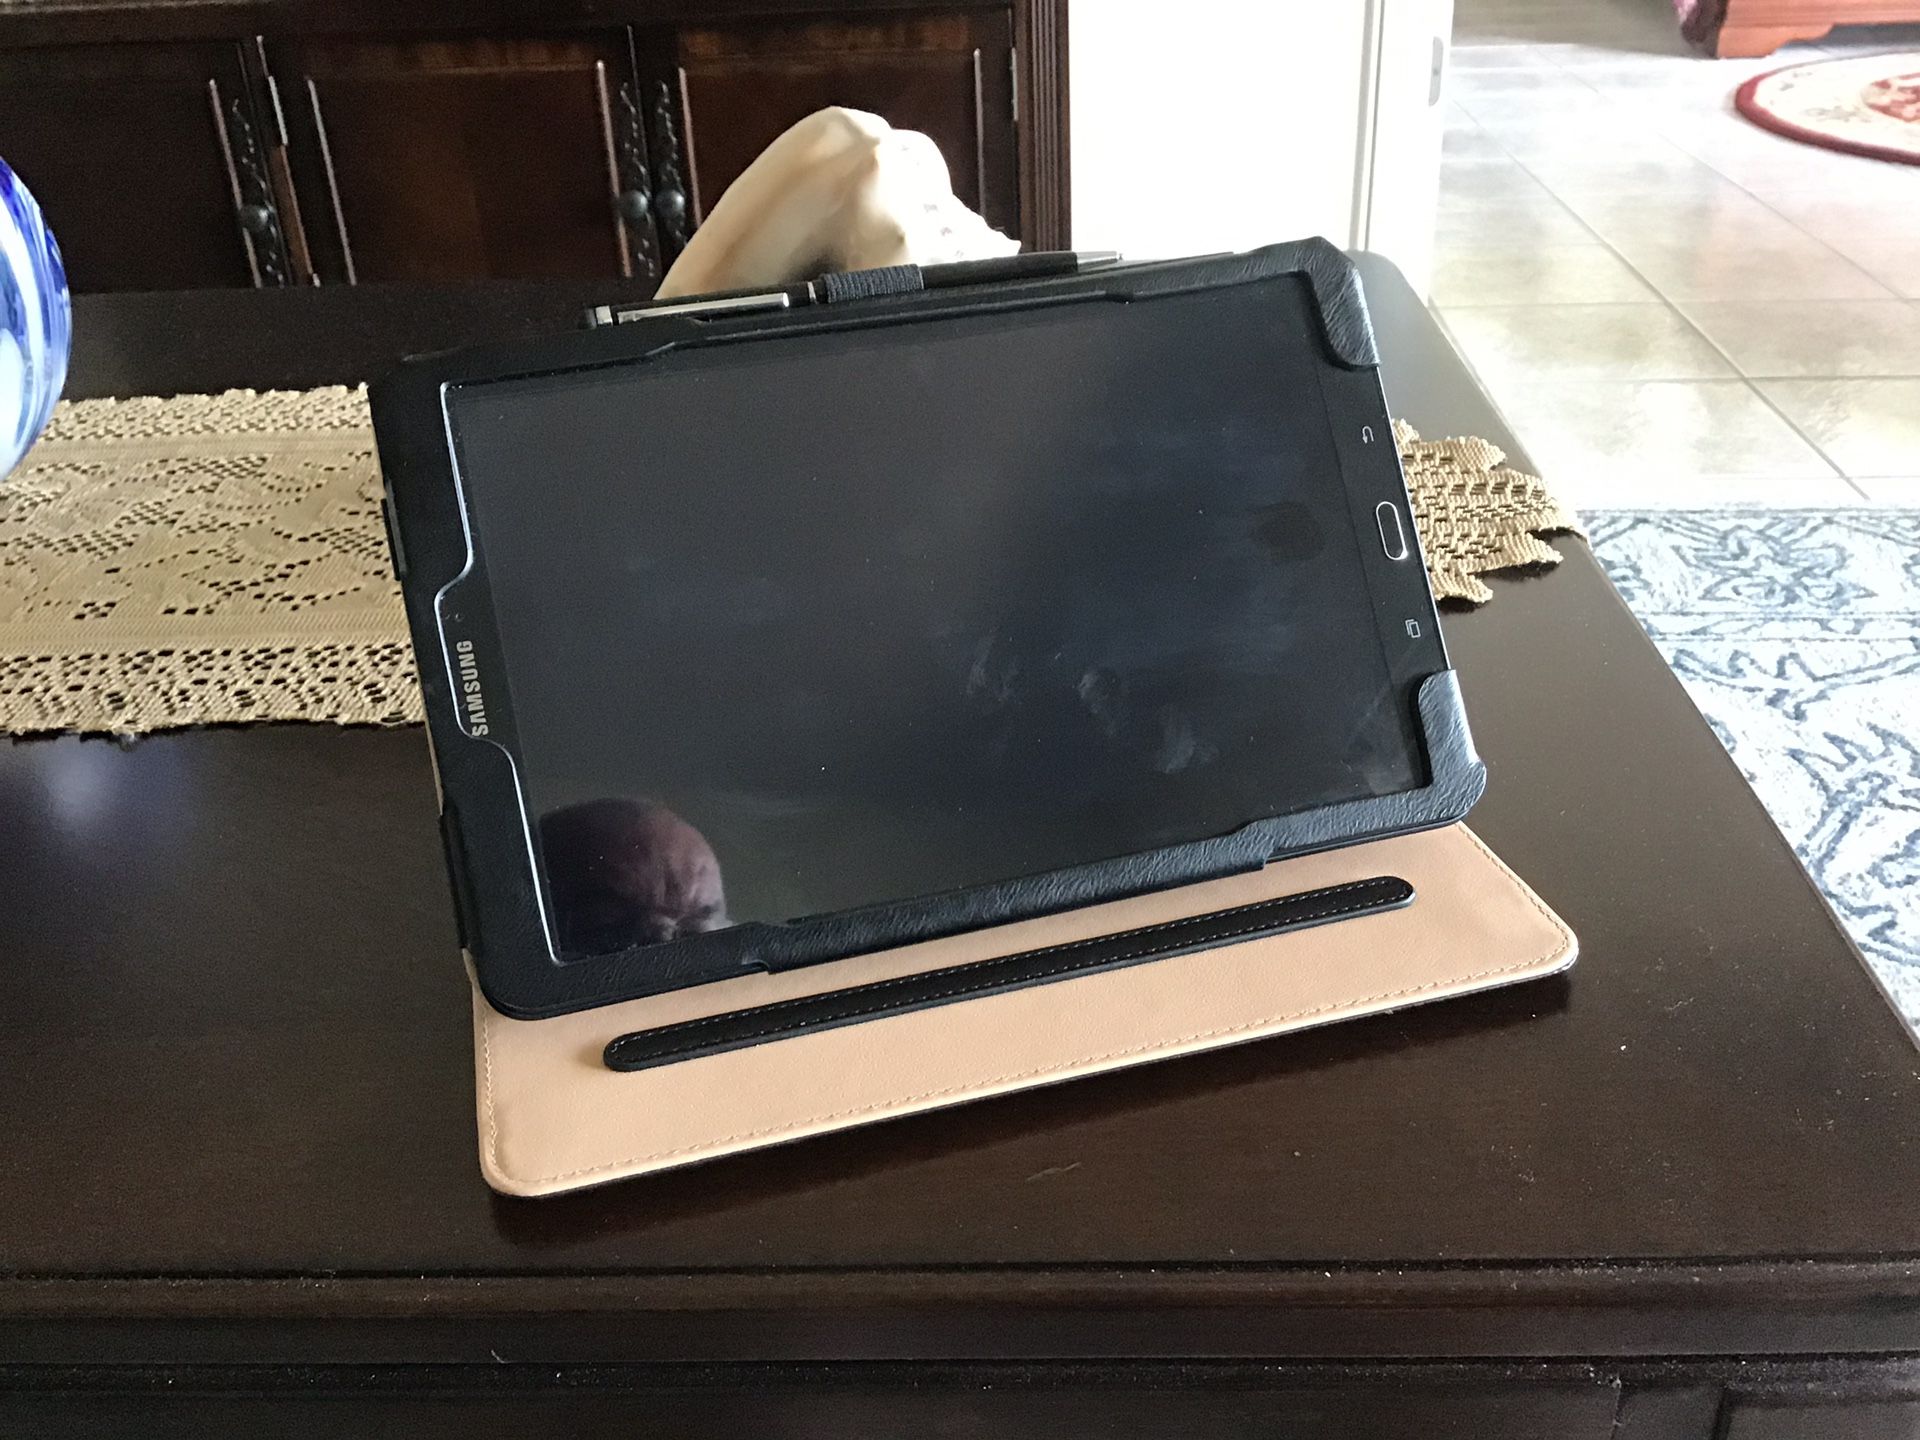 Samsung Galaxy Tab 7” with case and 32 GB SD card